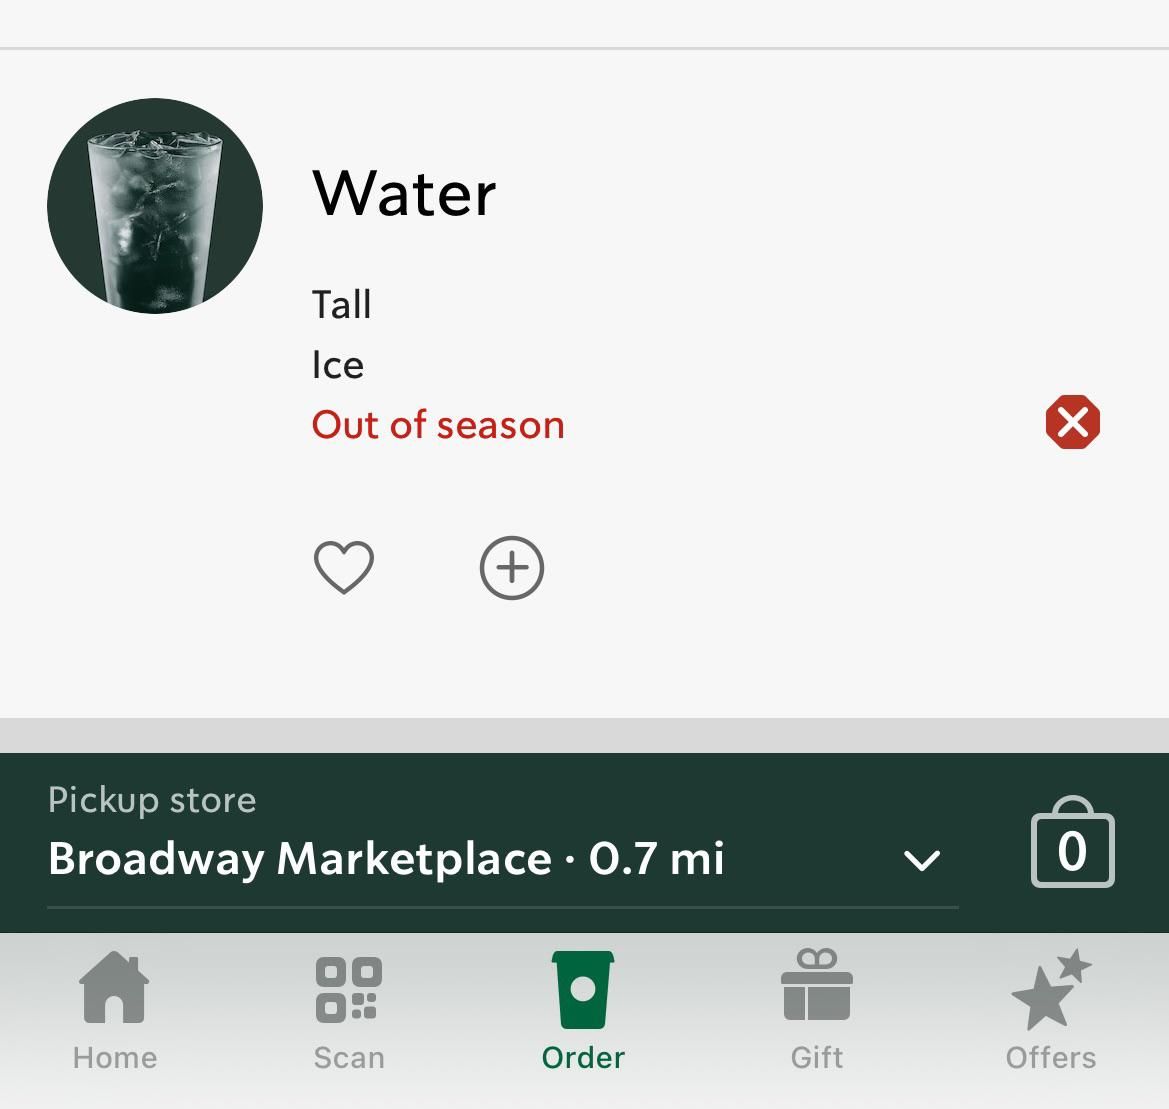 Don’t you hate when water season is over at Starbucks?